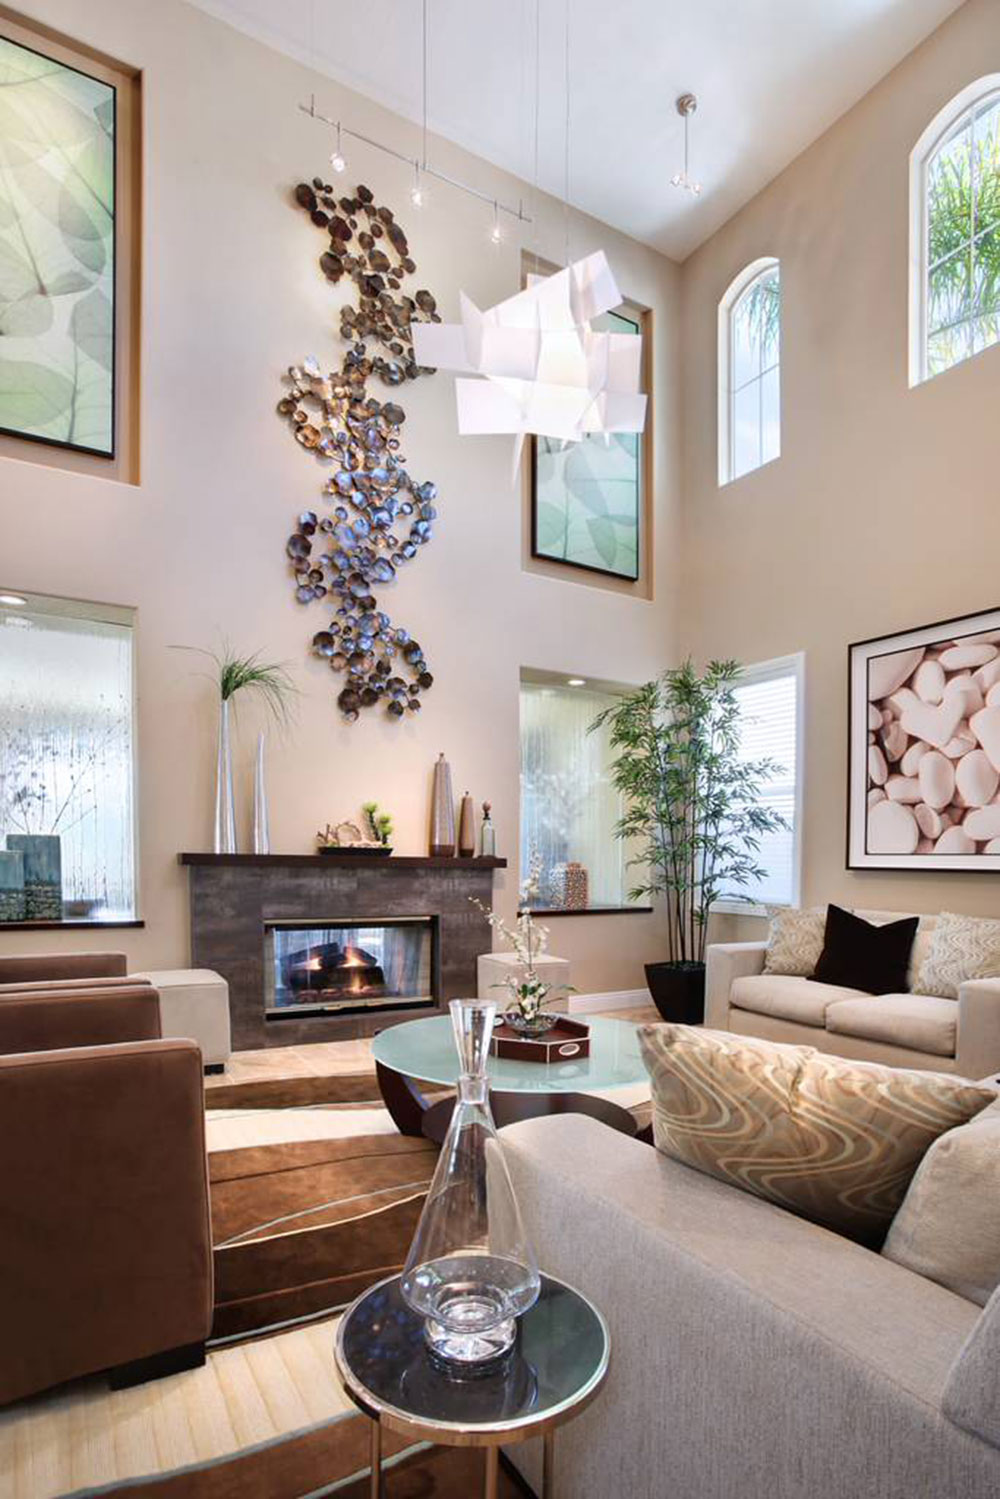 How To Decorate A Large Living Room Wall With Vaulted Ceilings | www